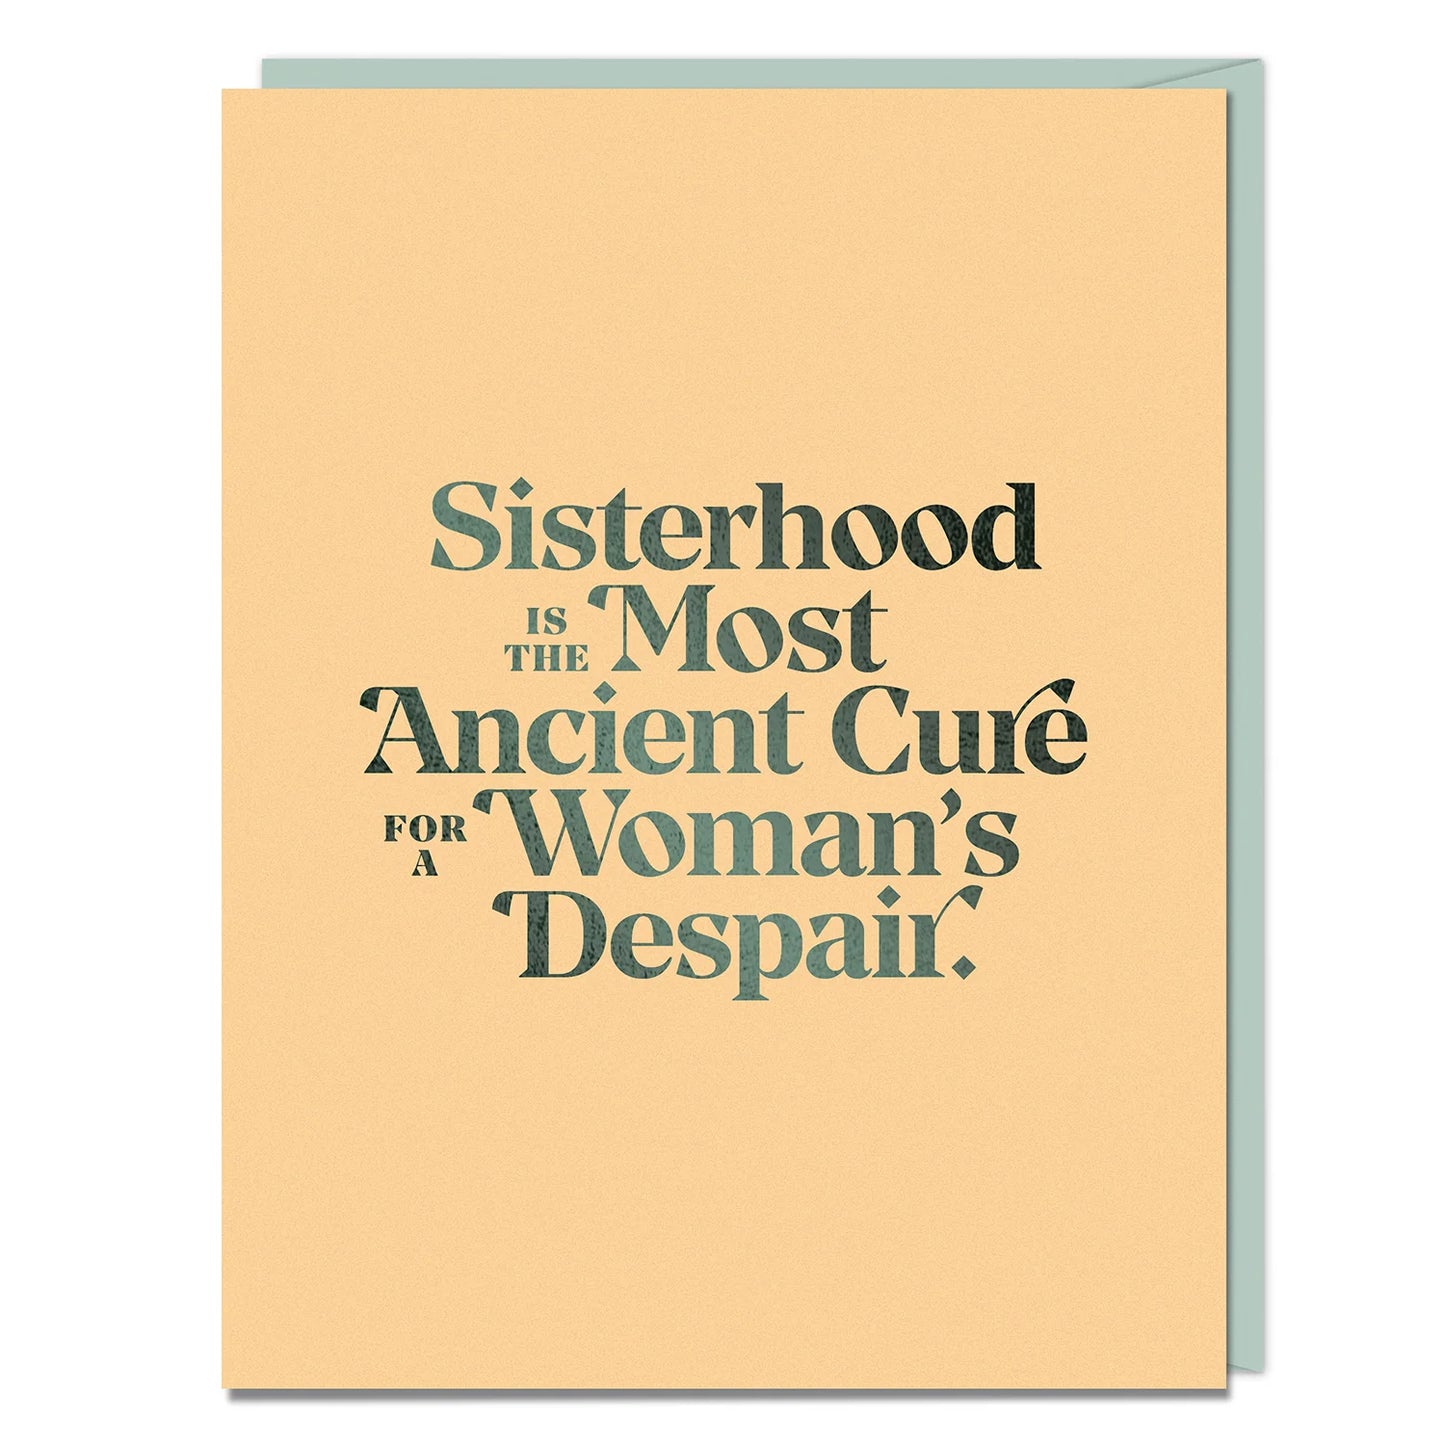 Sisterhood Is The Most Ancient Cure for Woman’s Despair Friendship Card